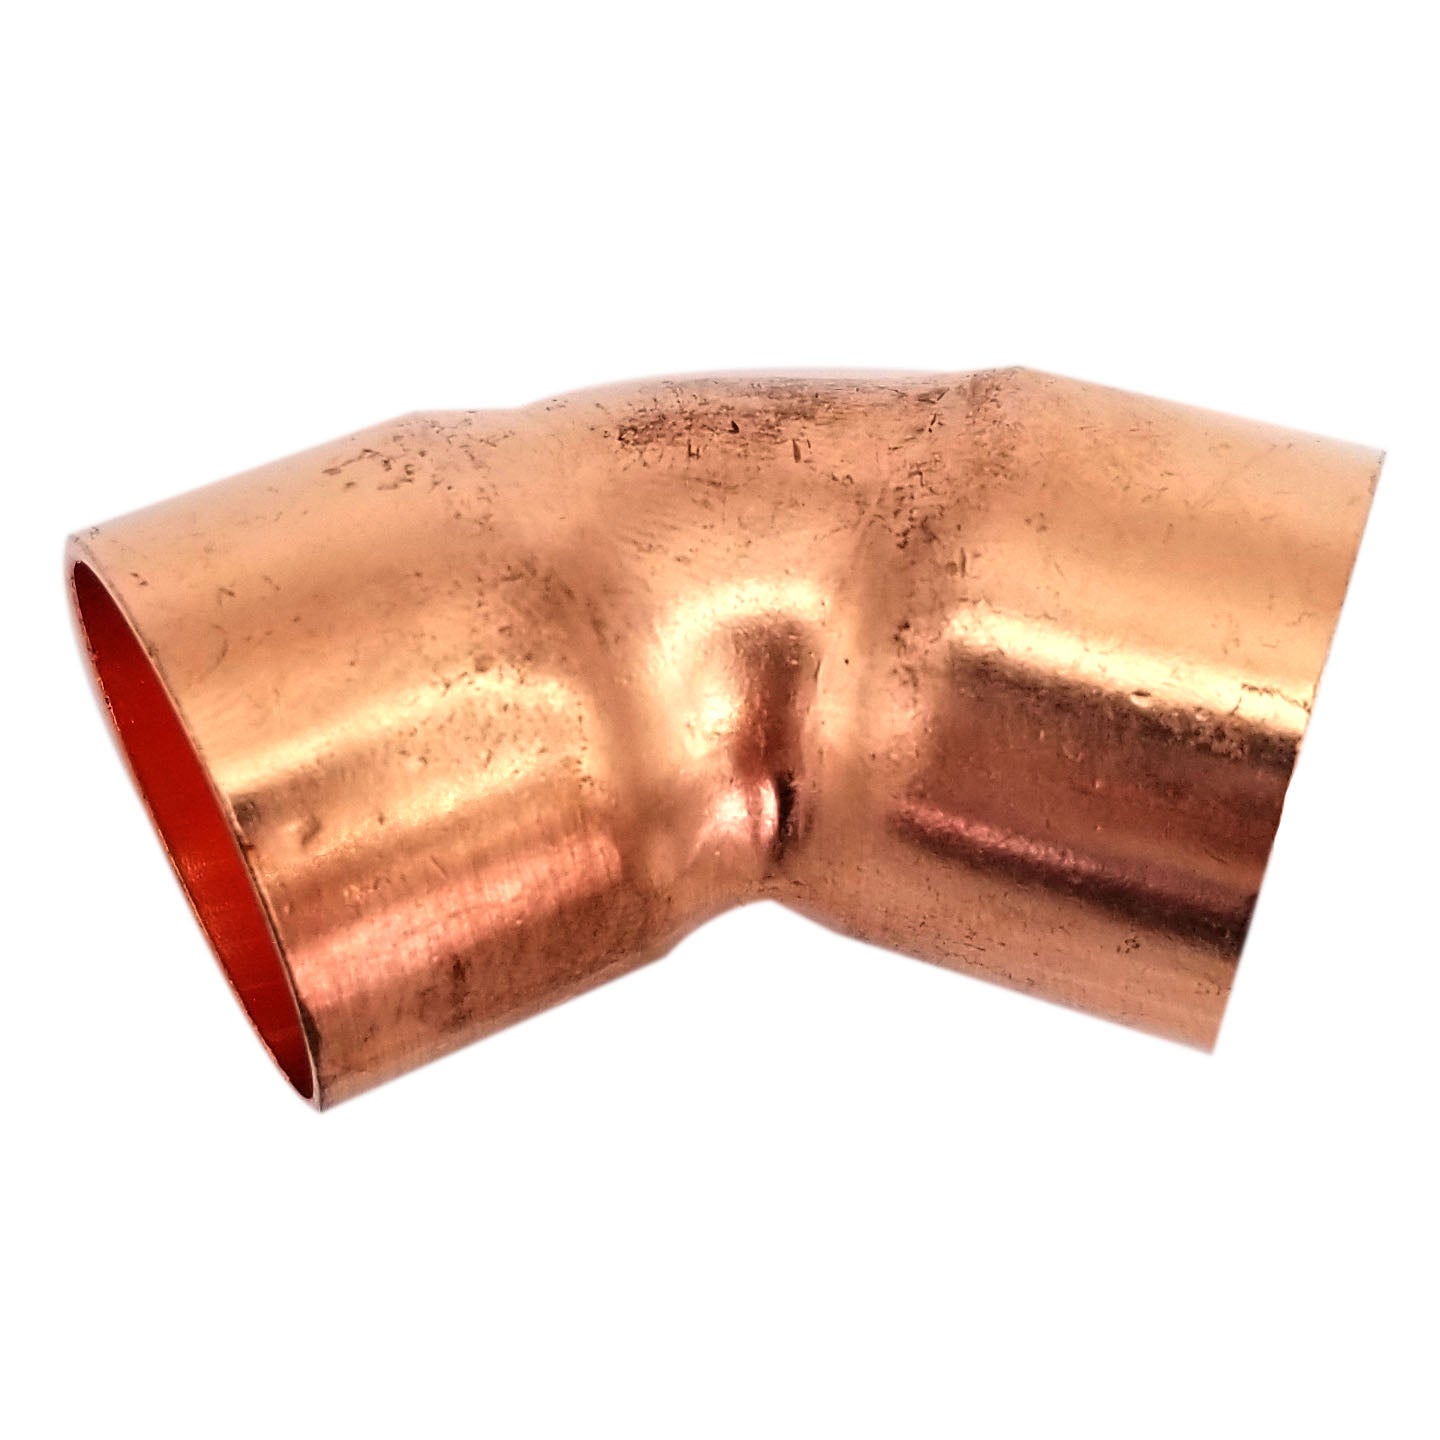 Copper Fitting 3/4 Inch (HVAC Outer Dimension) 5/8 Inch (Plumbing Inner Dimension) - 45 Degree Copper Pressure Elbow & HVAC – 99.9% Pure Copper - 5 Pack